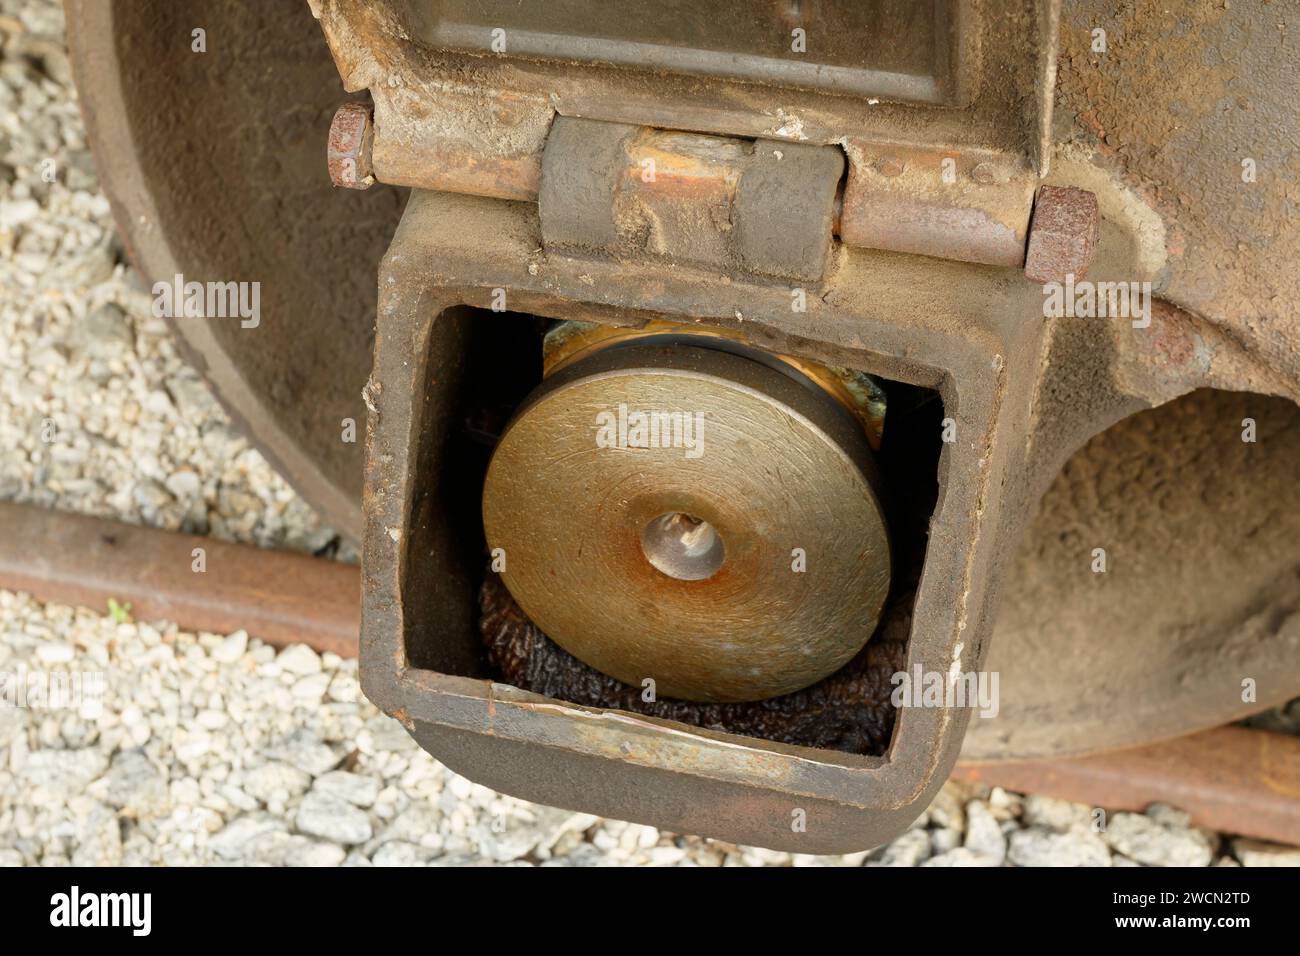 Railroad car axle bearing box with access door open. Lubrication and inspection access. Stock Photo